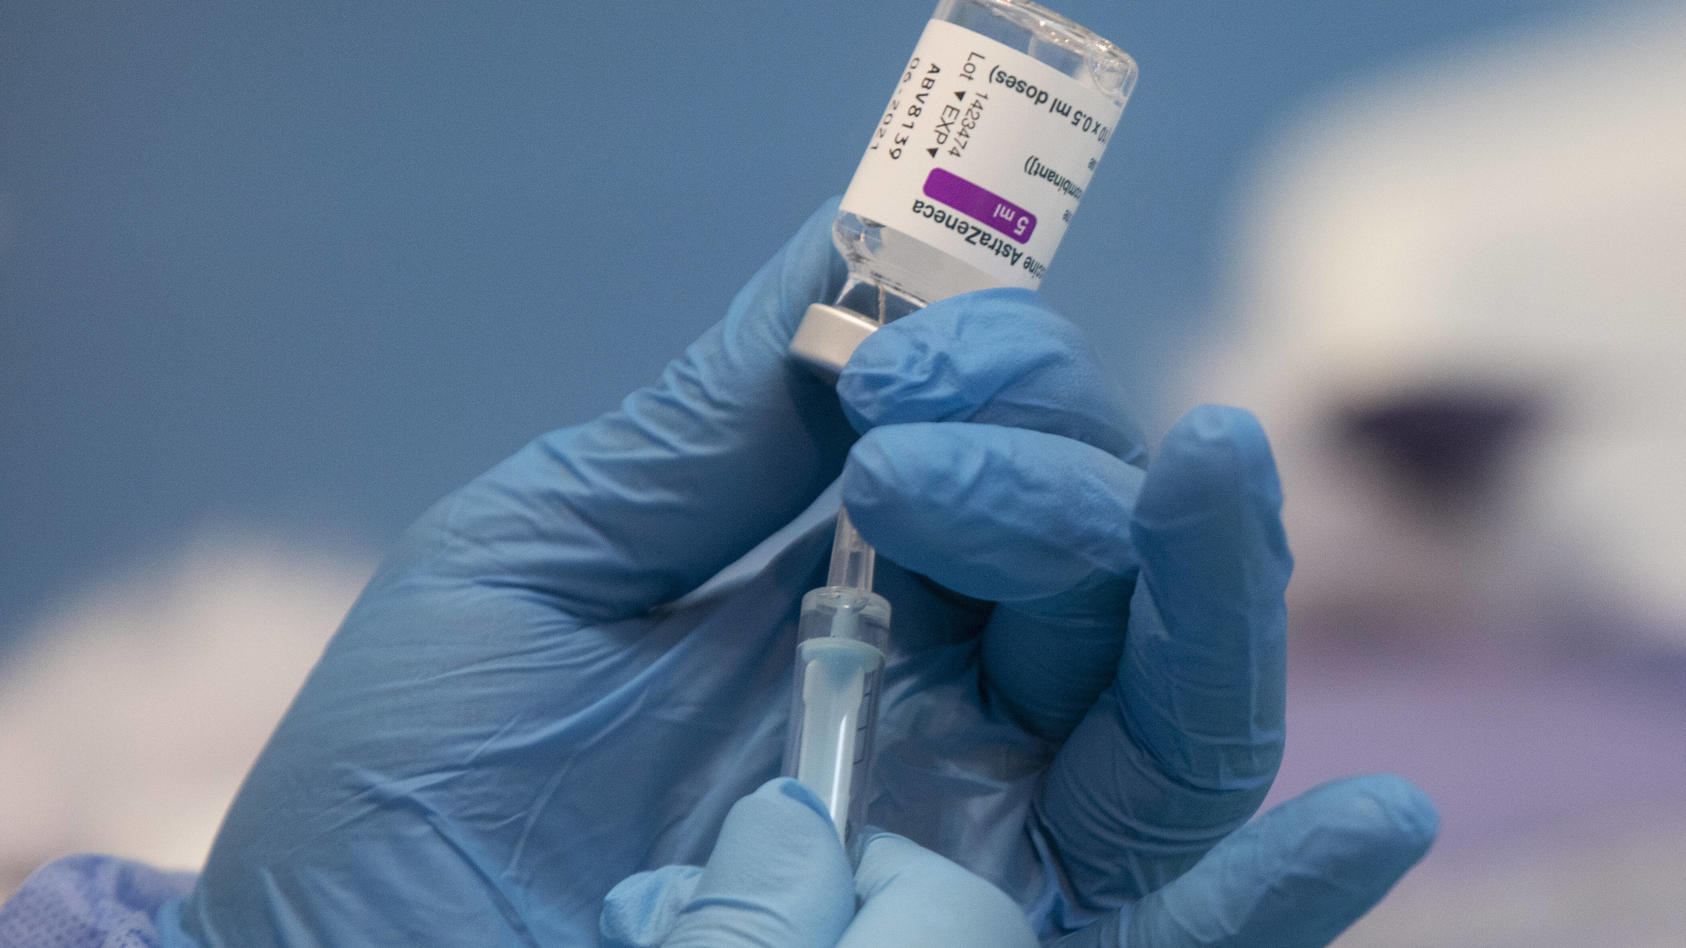  A healthcare professional holds a syringe with a vial of AstraZeneca s COVID-19 vaccine at a vaccination device at the SADUS pavilion in Seville, Andalusia, Spain, March 24, 2021. 25 MARCH 2021 Maria Jos Lopez / LagenciaEP 03/25/2021 Seville Andalus